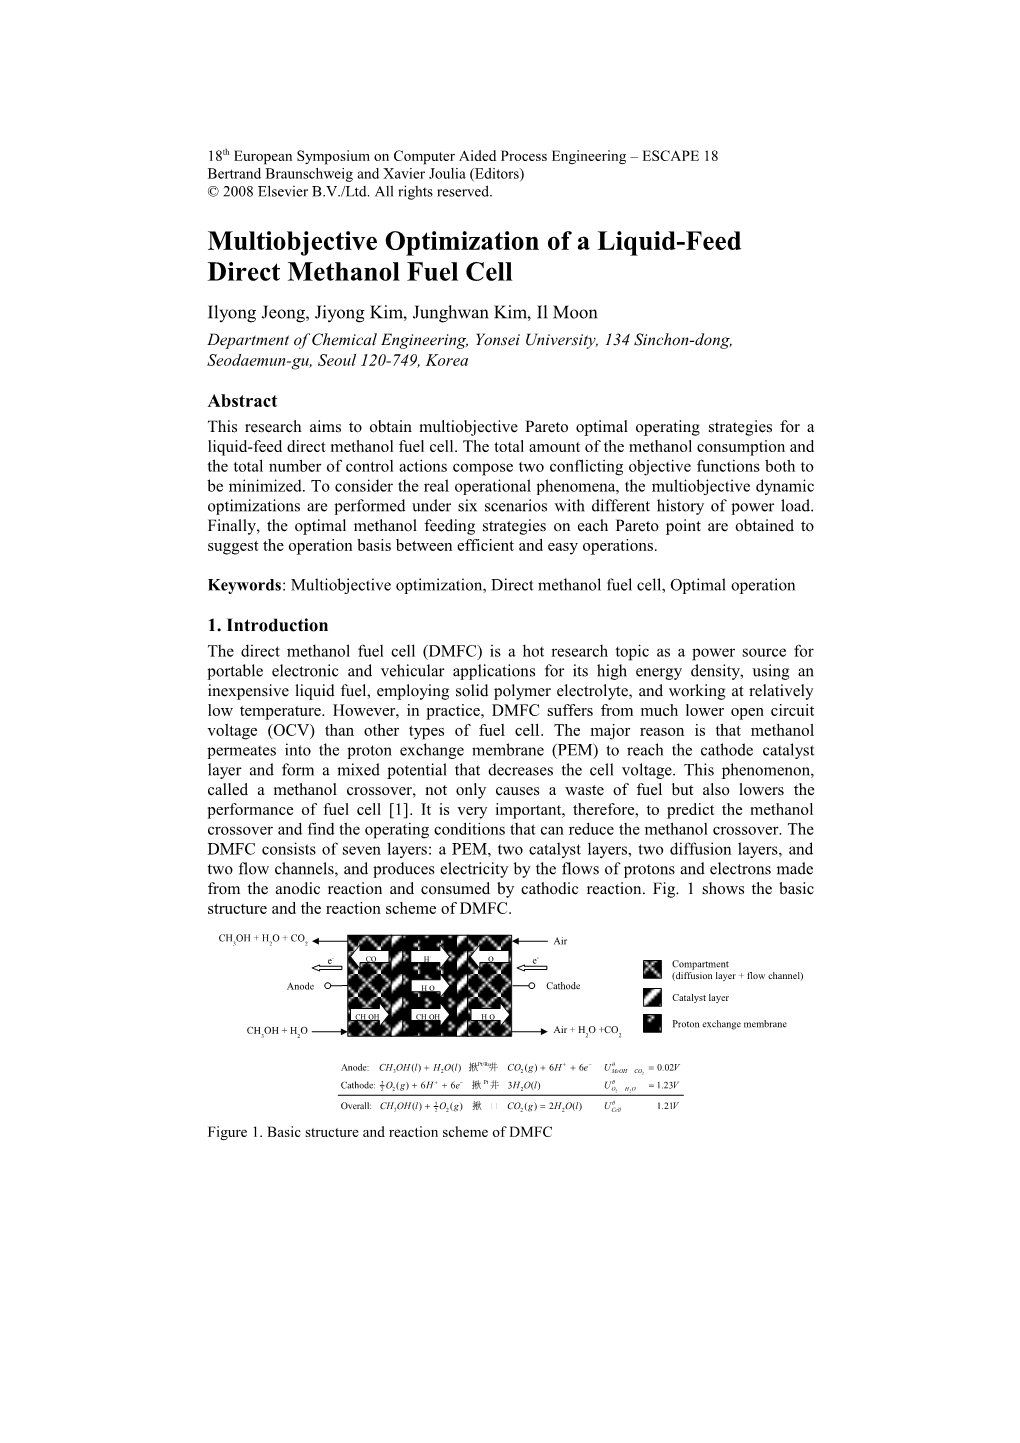 Multiobjective Optimization of a Liquid-Feed Direct Methanol Fuel Cell